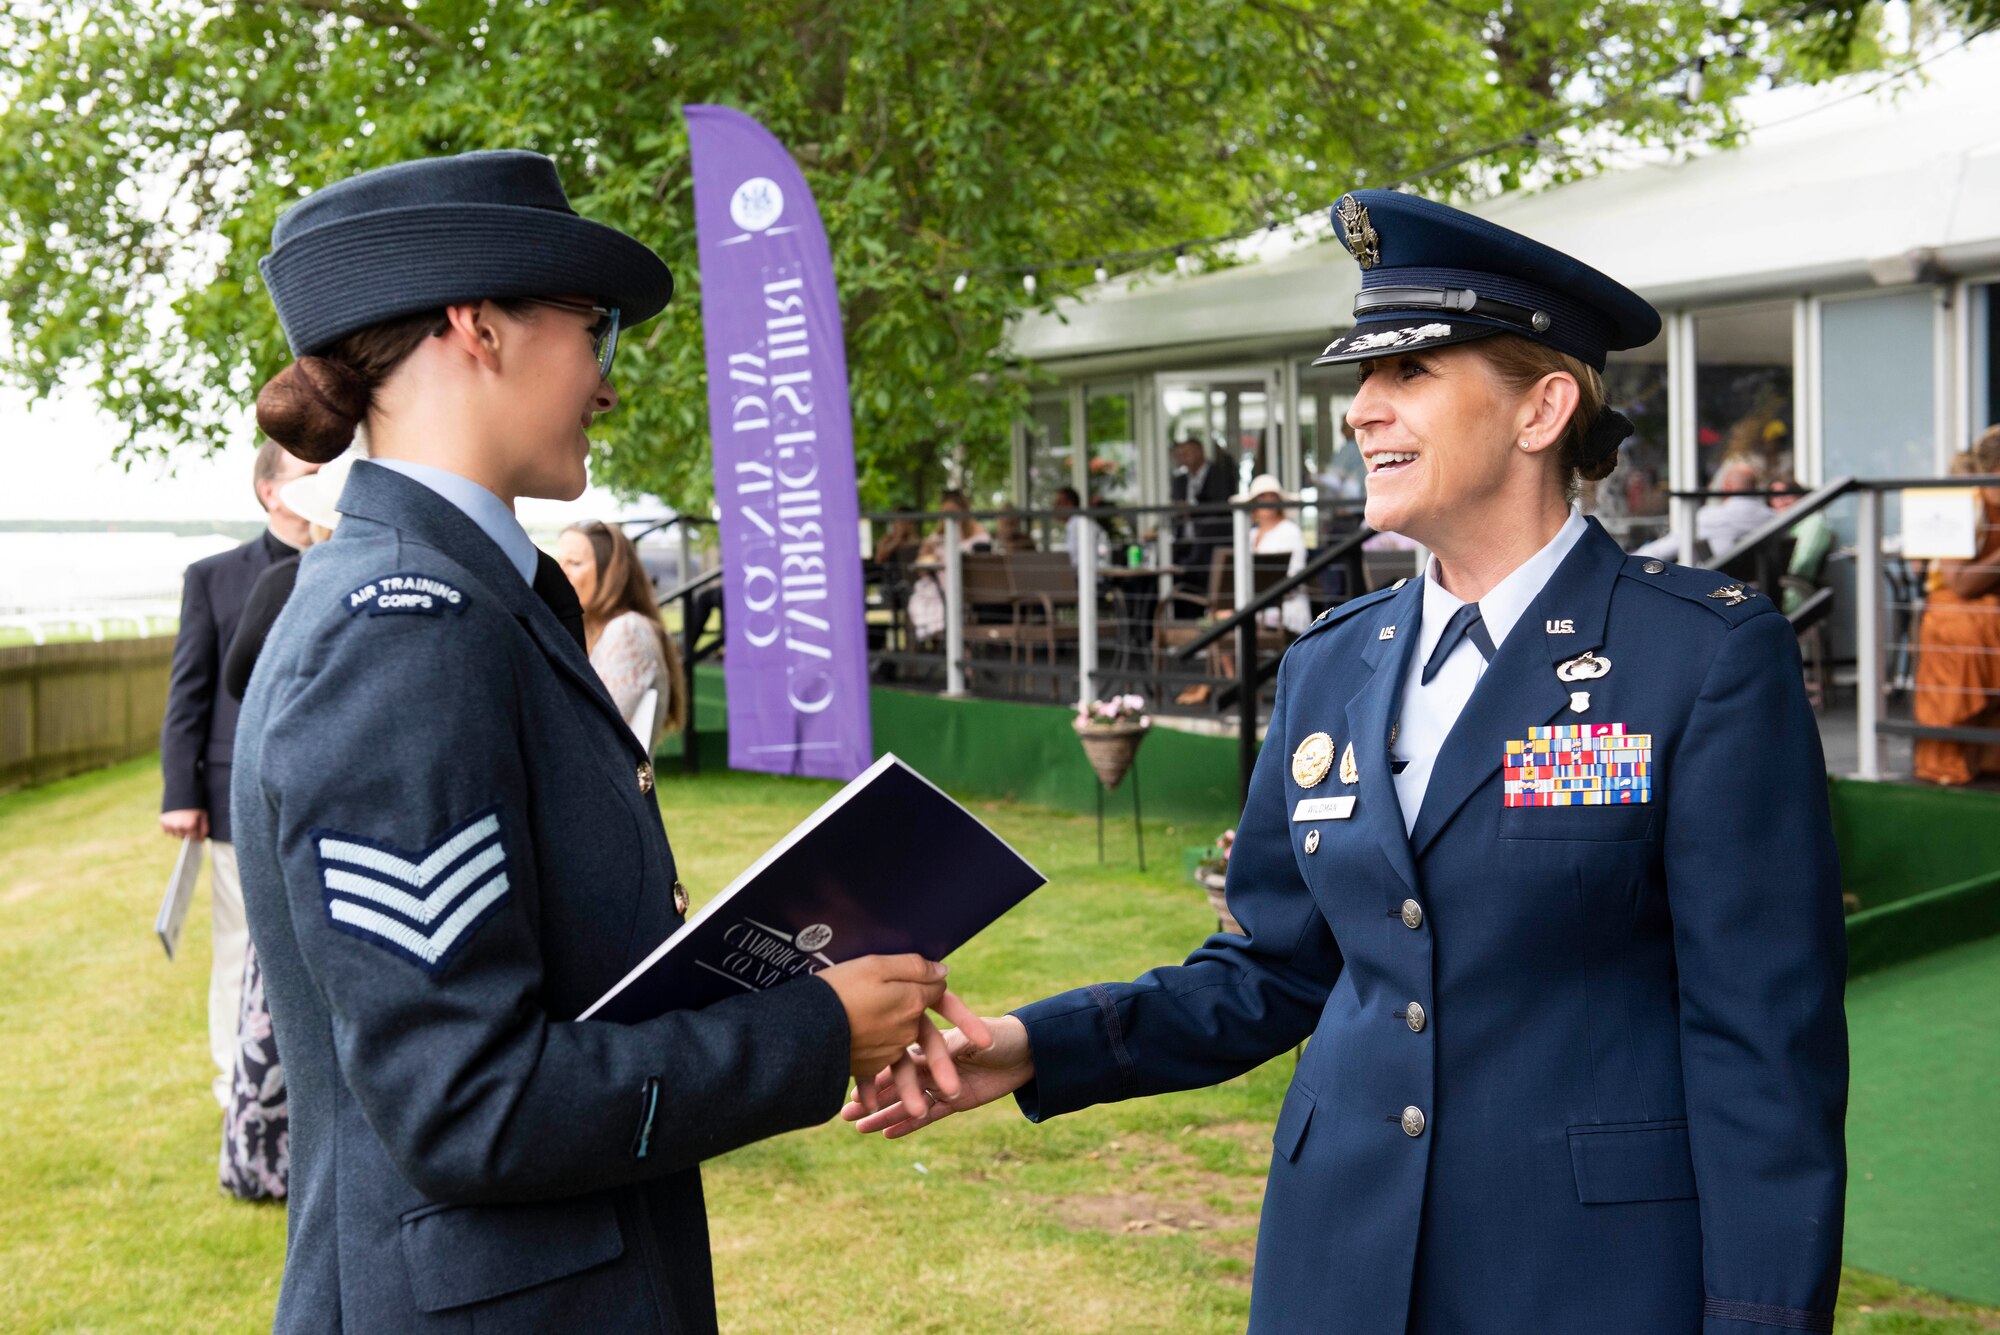 U.S. Air Force Col. Lisa Wildman, 501st Combat Support Wing vice commander, engages with attendees during the Cambridgeshire County Day at the Newmarket July Course, England, June 23, 2022. The County Day was an opportunity to celebrate Cambridgeshire and Her Majesty The Queen’s Platinum Jubilee. (U.S. Air Force photo by Senior Airman Jennifer Zima)